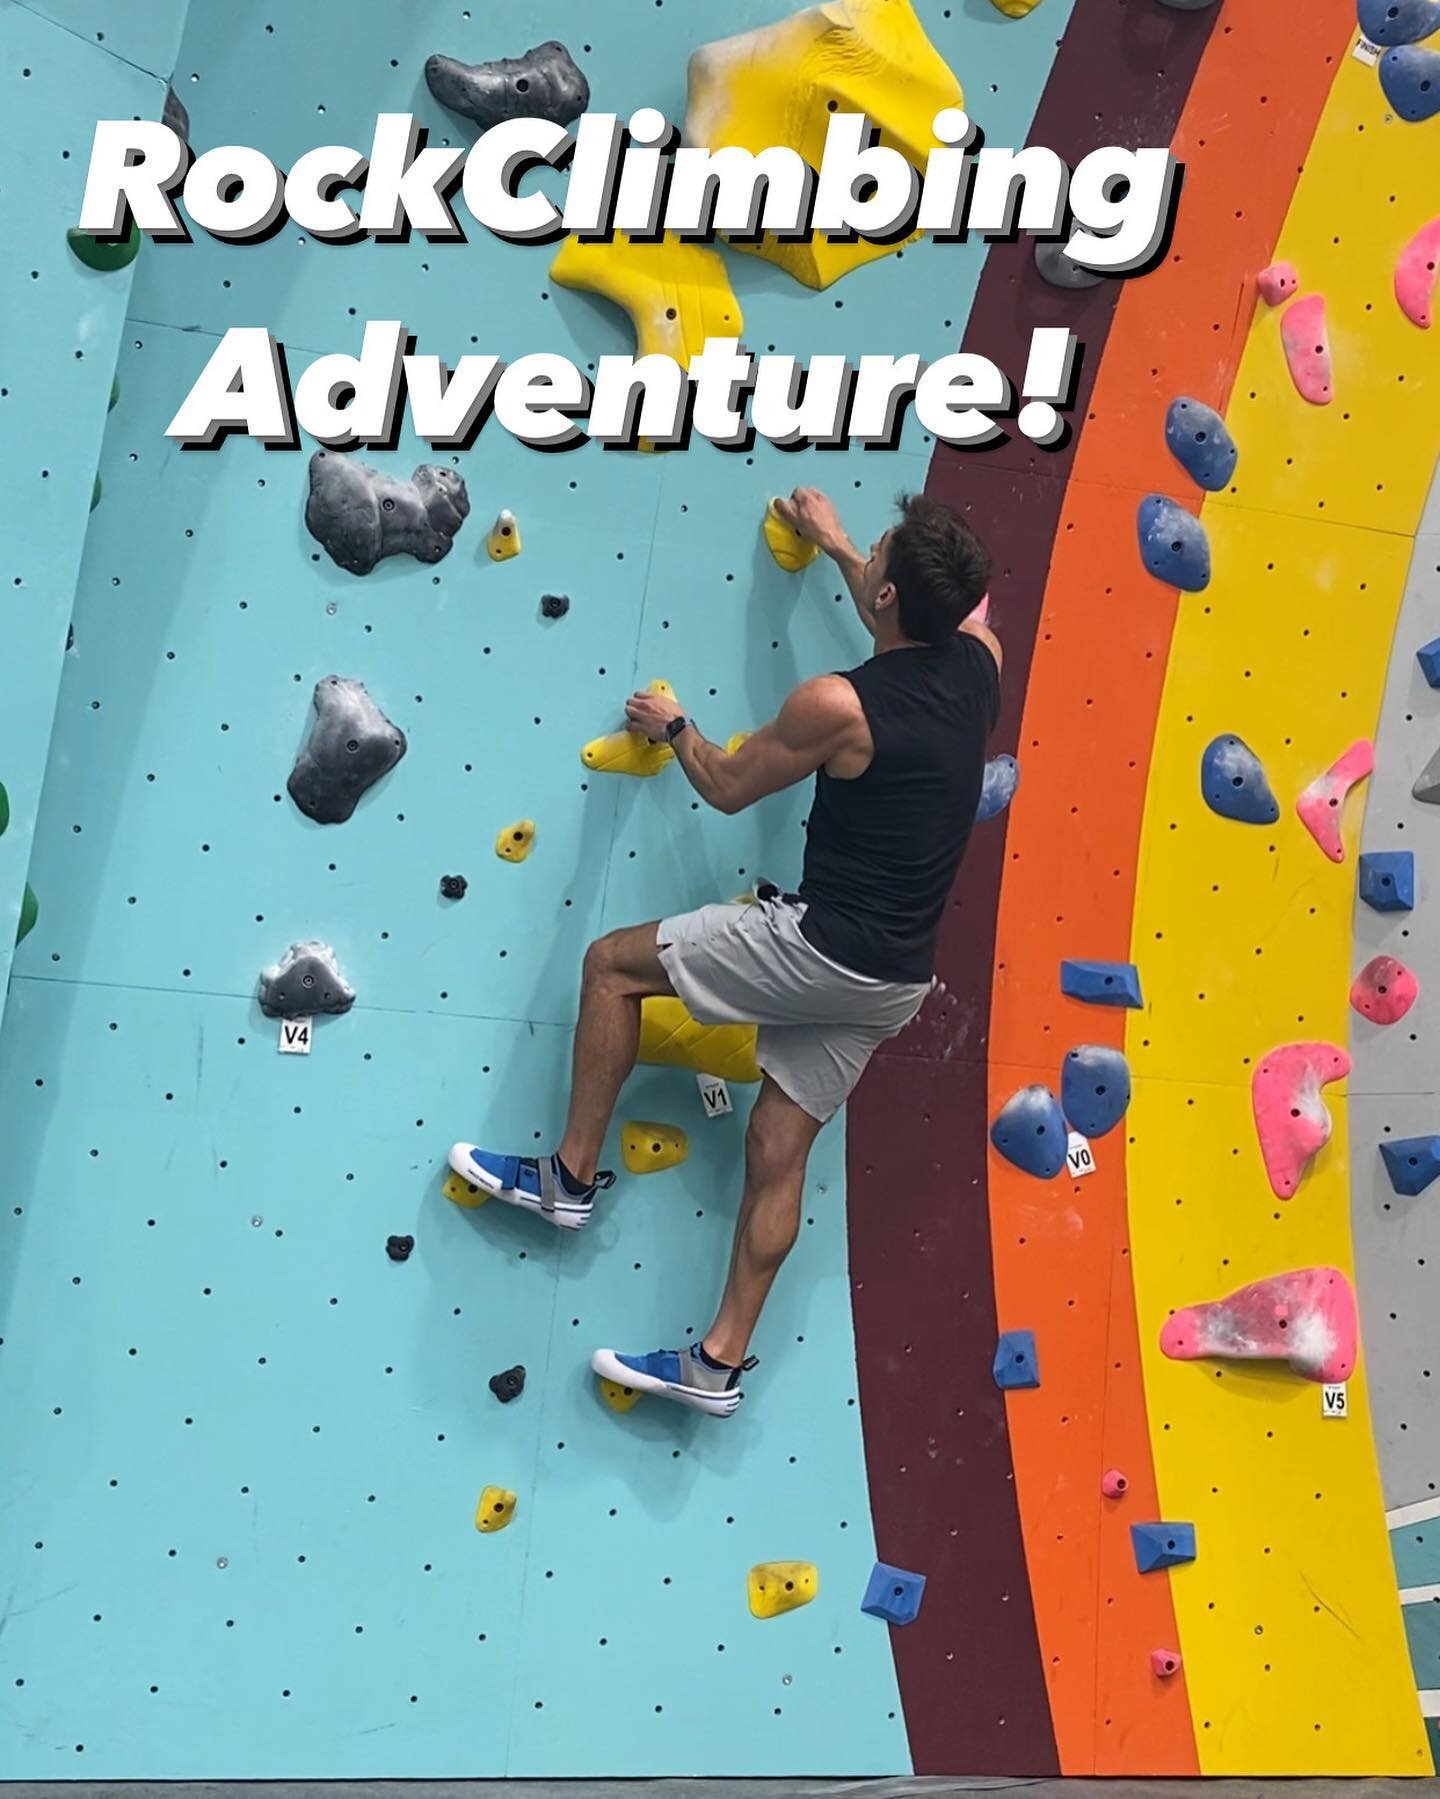 Go on an Adventure! 🧗&zwj;♂️
Try something new- today I went rock climbing with one of my clients (who I am training to achieve his specific goal of enhancing his climbing ability). I&rsquo;ve never been rock climbing before (save a birthday party i